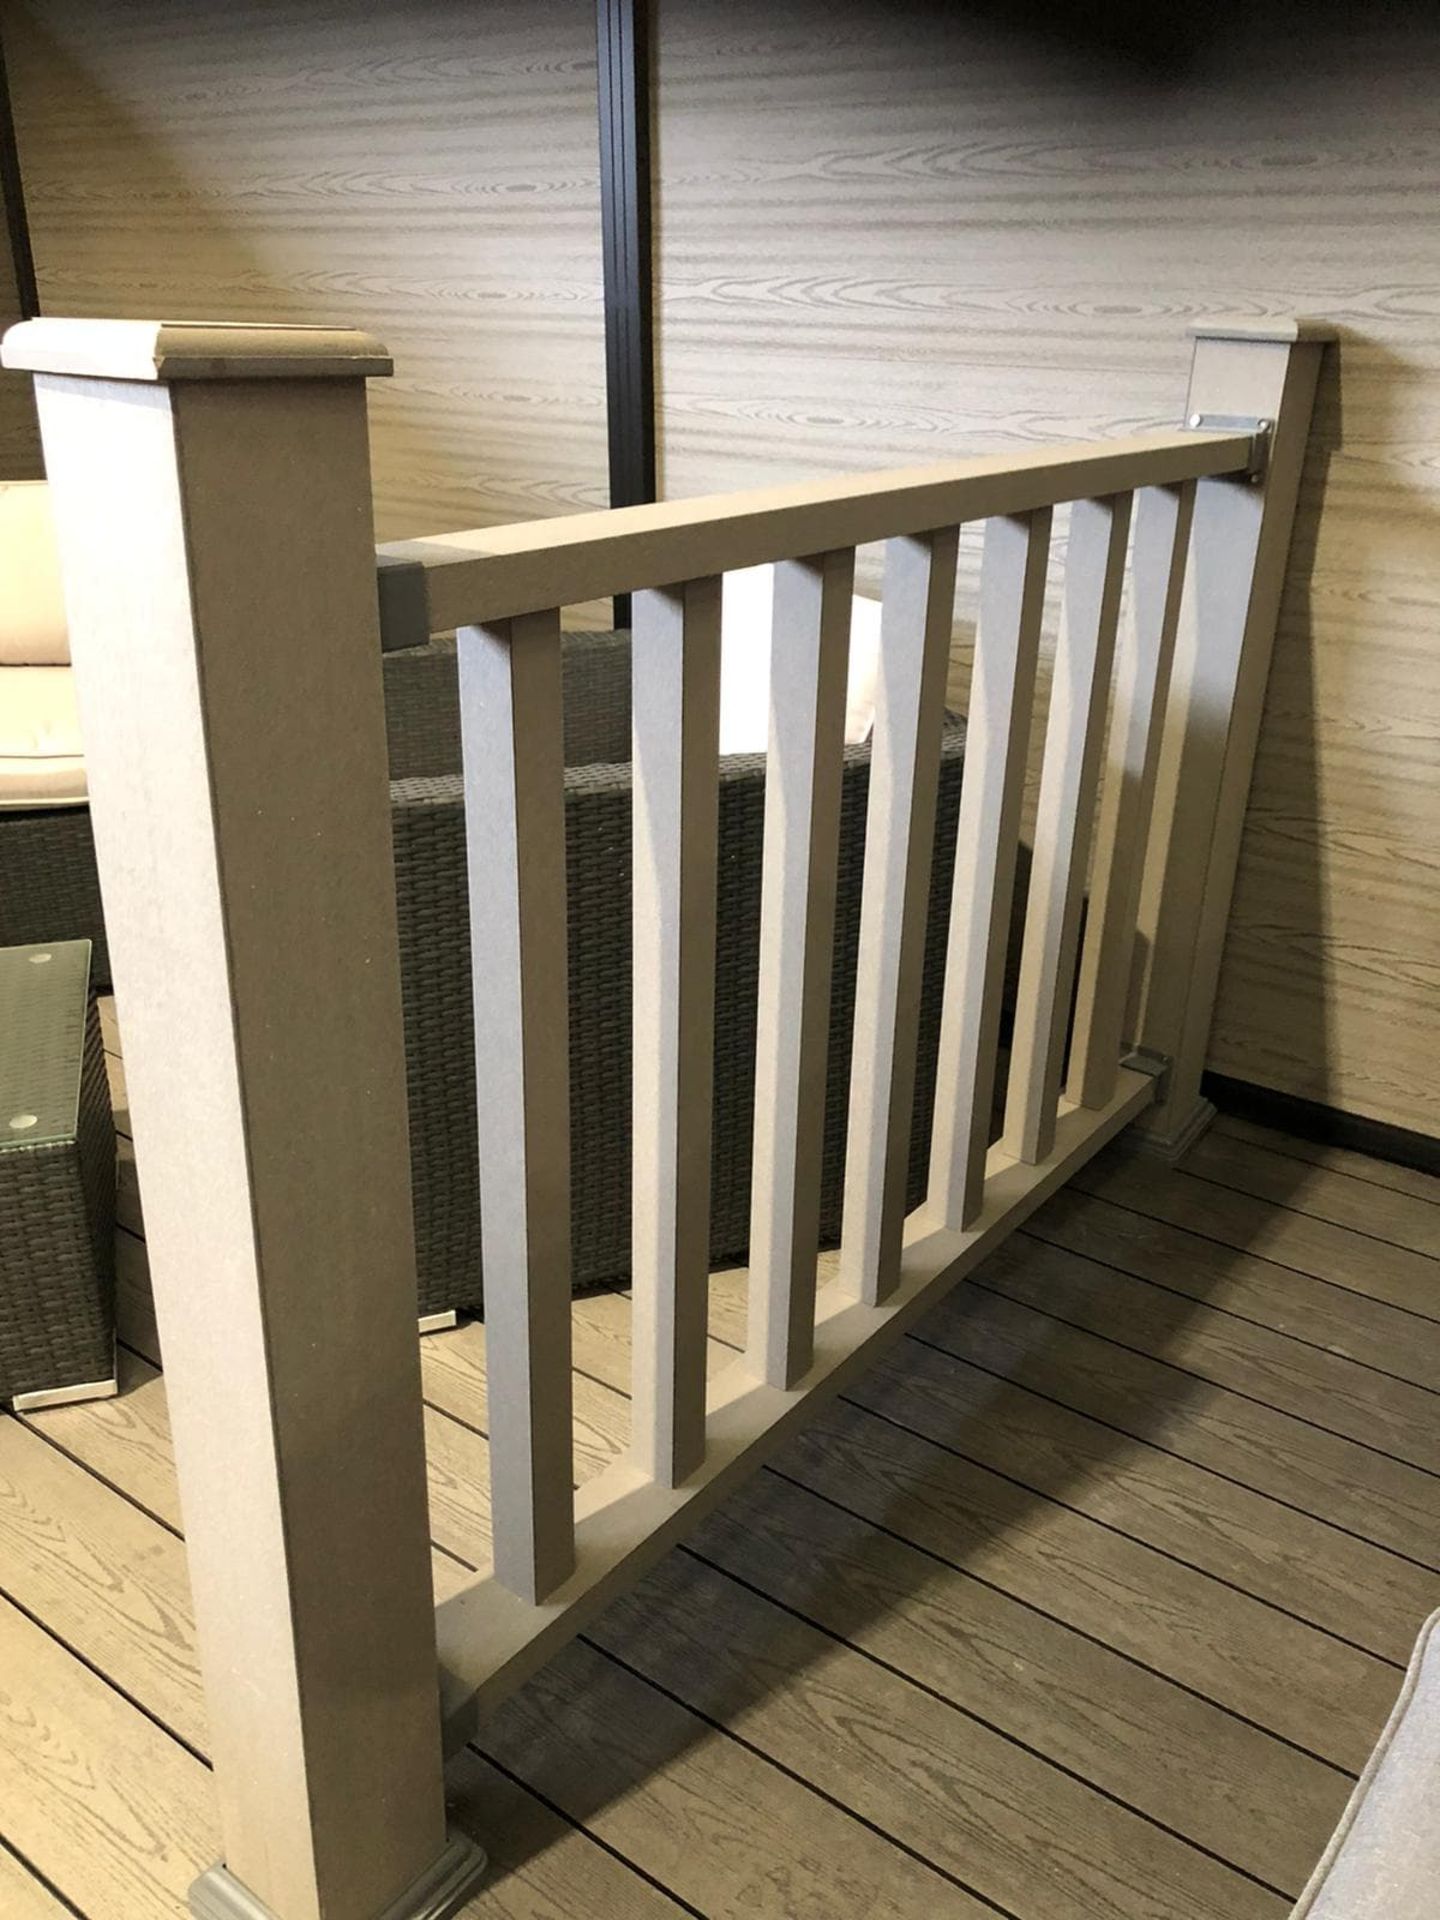 * Light Grey Balustrade & Railing Kit approx (10ft x 3.8ft high) 3m long x 1.14m High includes all